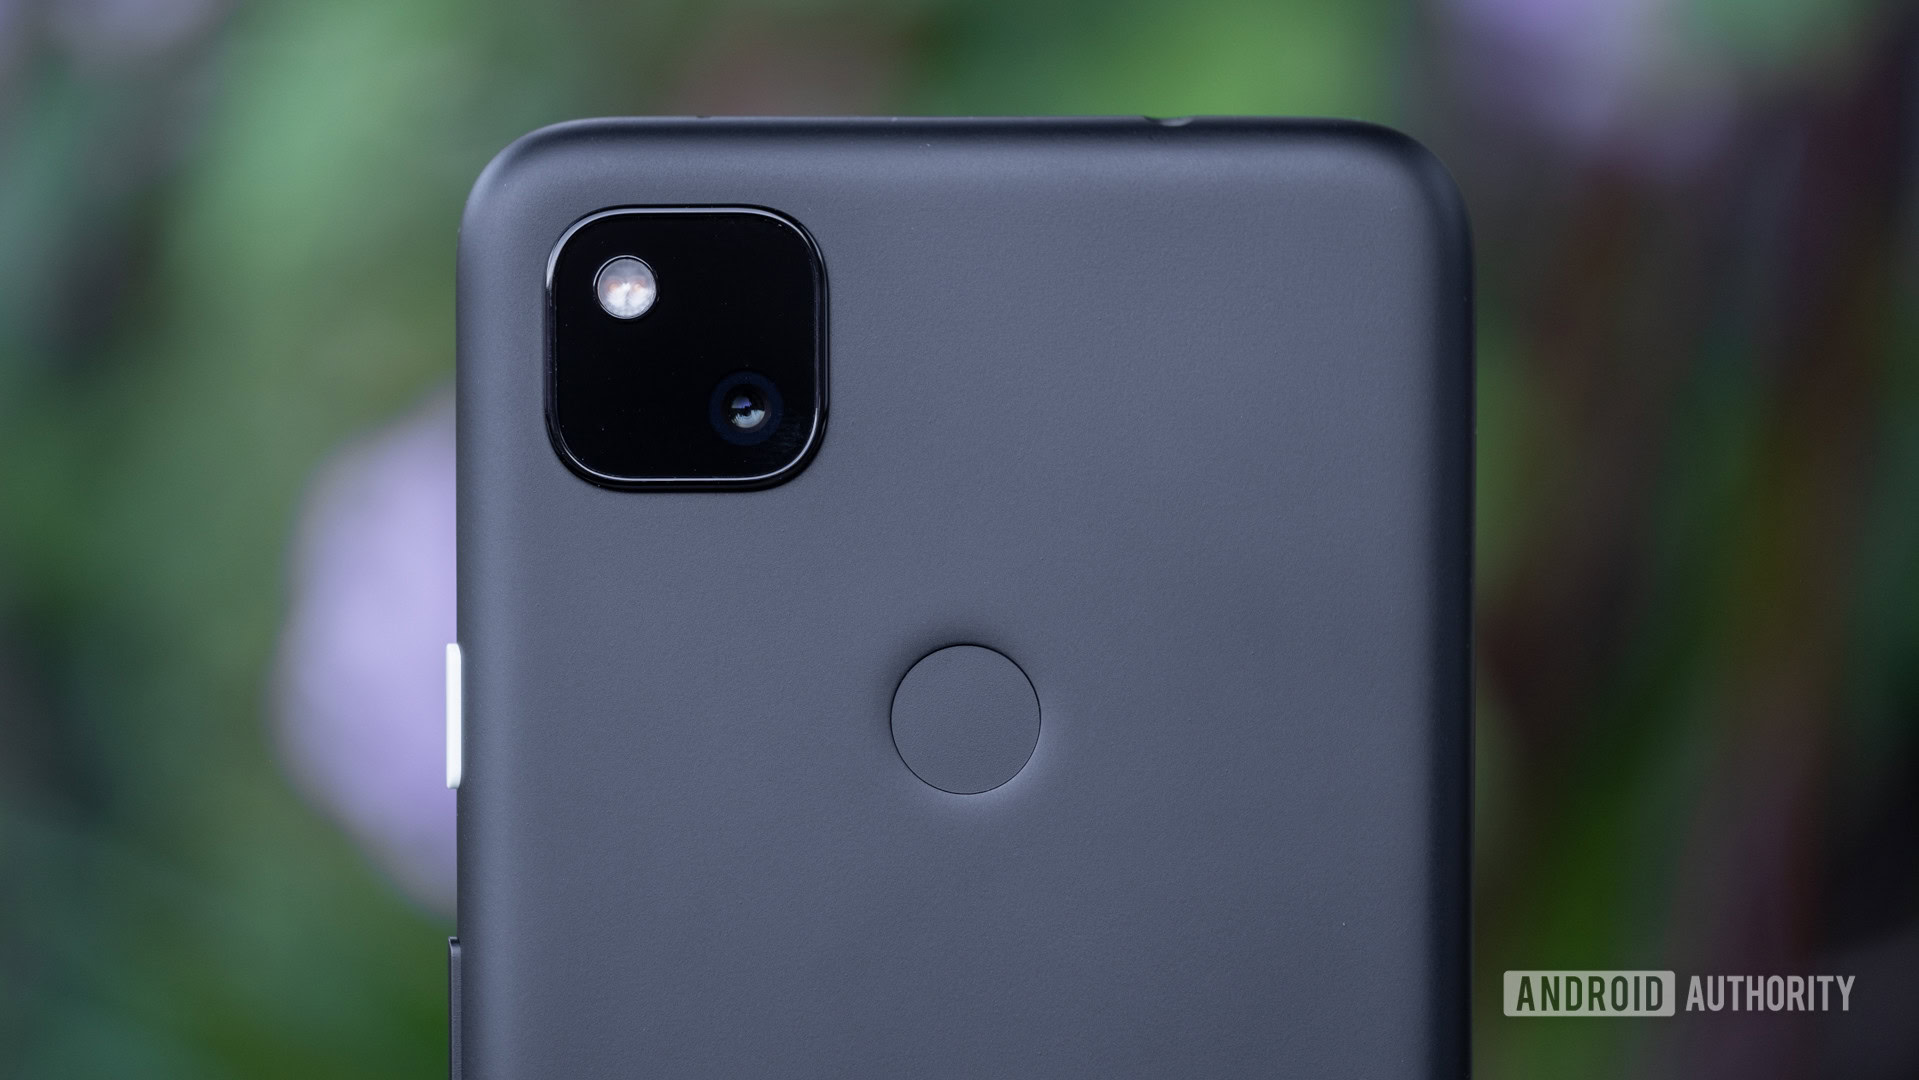 Google Pixel 4a price, release date, deals, and more - Android Authority